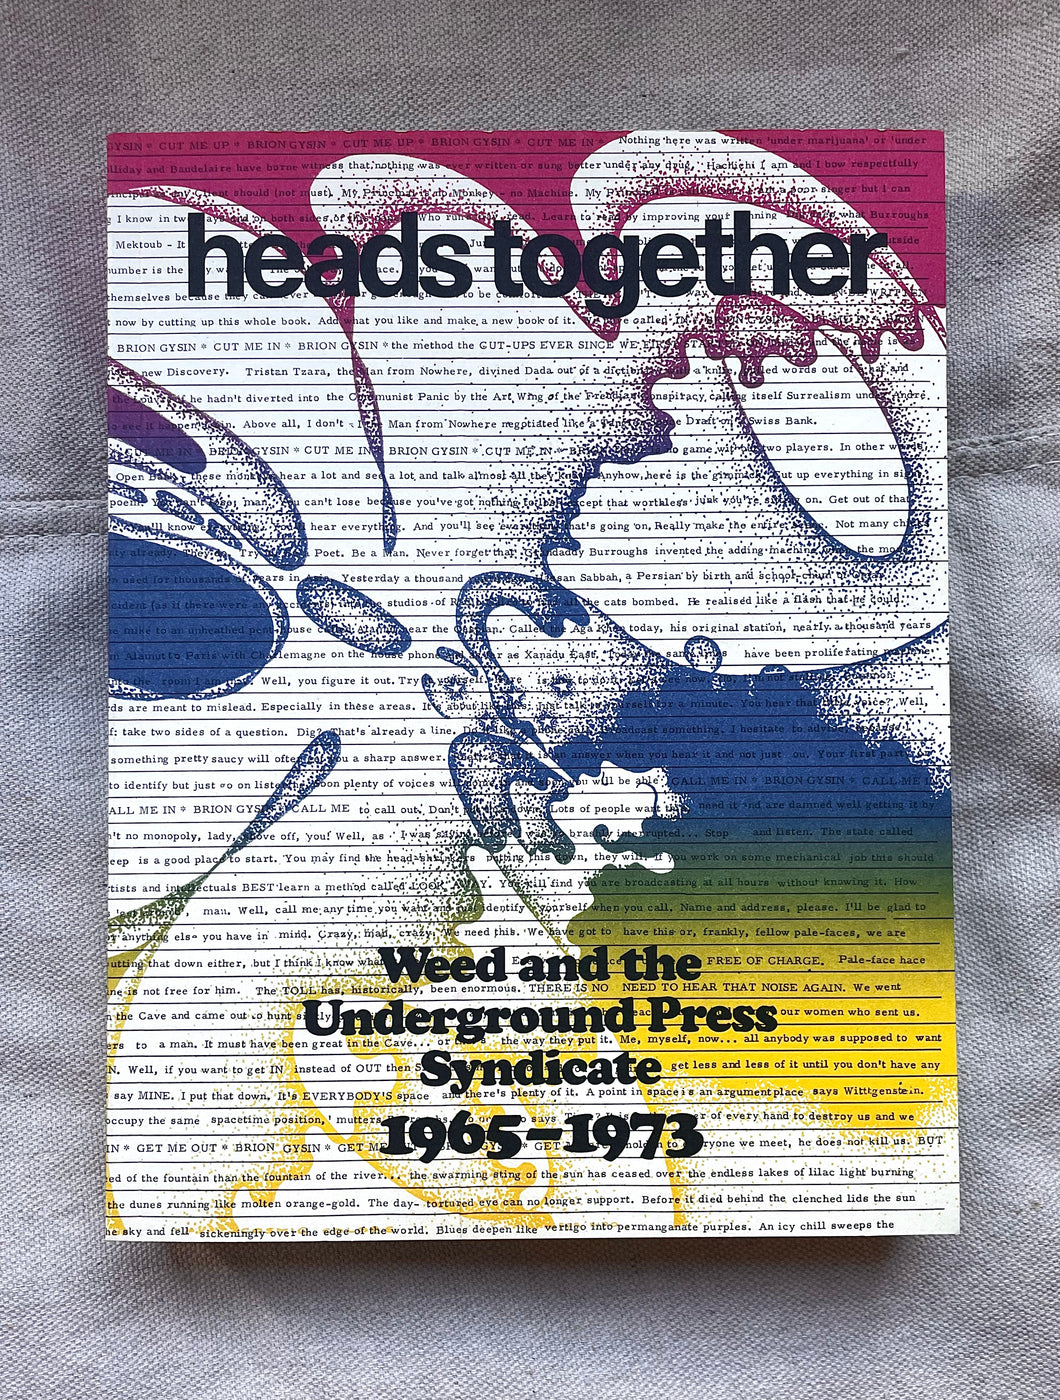 Heads Together - Weed and the Underground Press Syndicate 1965-1973 Book